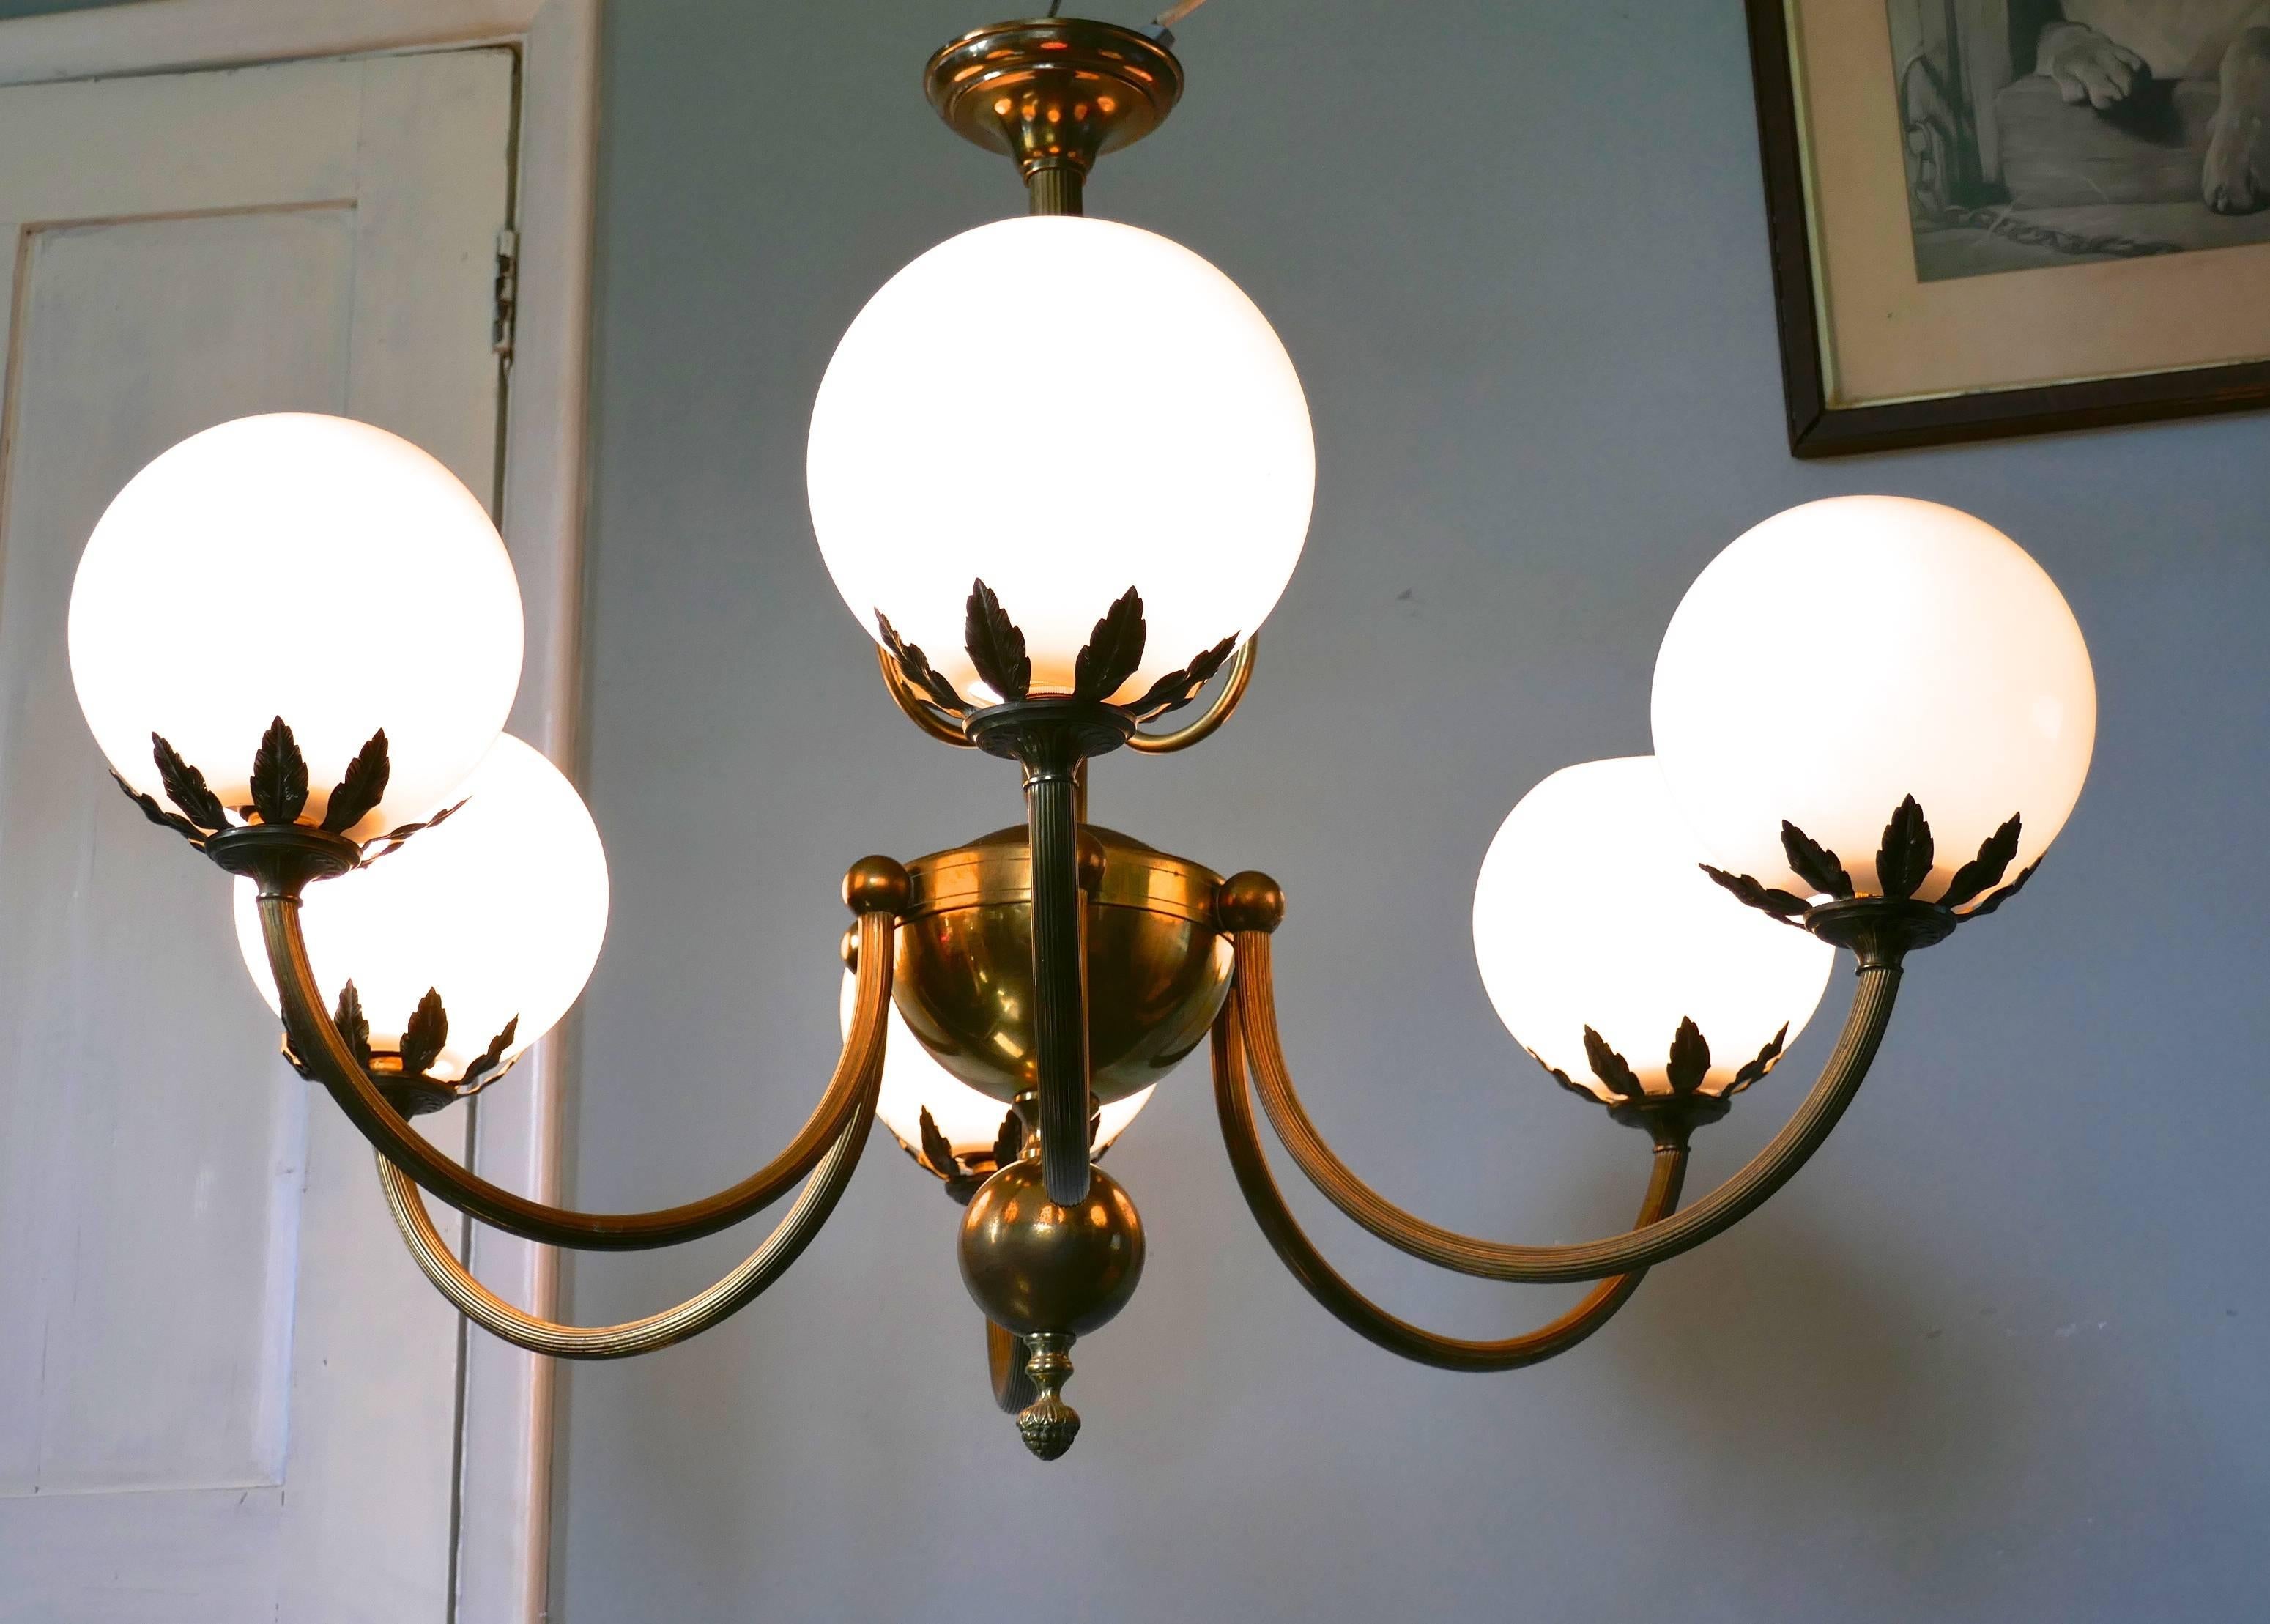 Very large French Art Deco six branch globe chandelier 

This is a very large piece, the six branch brass frame has large bulbous centre piece and the lamp holders are decorated with brass leaves to adorn the white glass globes
The lamp is in